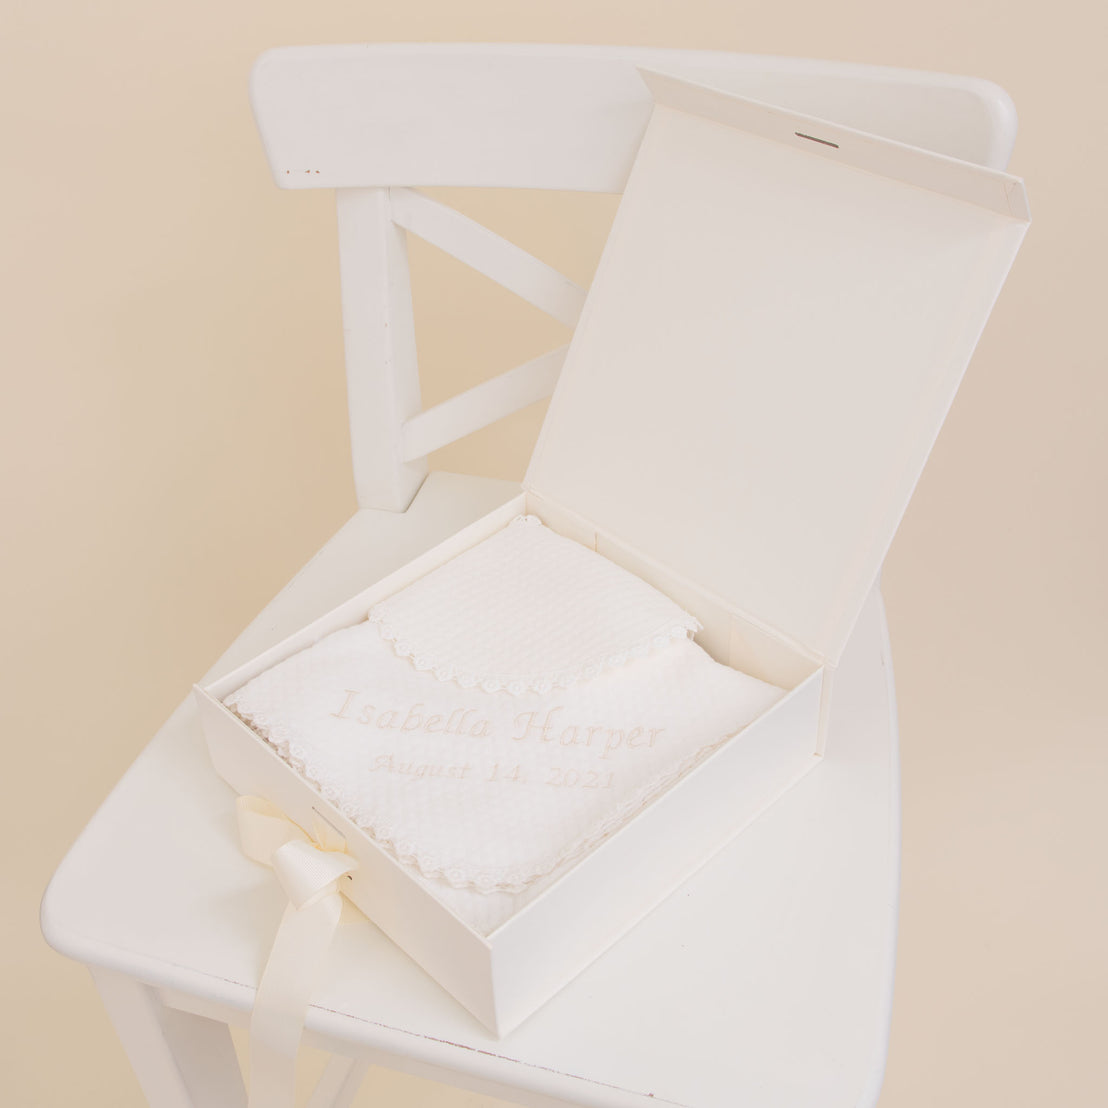 A white chair with a Baby Beau & Belle Baby Girl Personalized Gift Set on the seat, containing a quilted cotton bib embroidered with "Isabella Harper August 14, 2021" in elegant script.